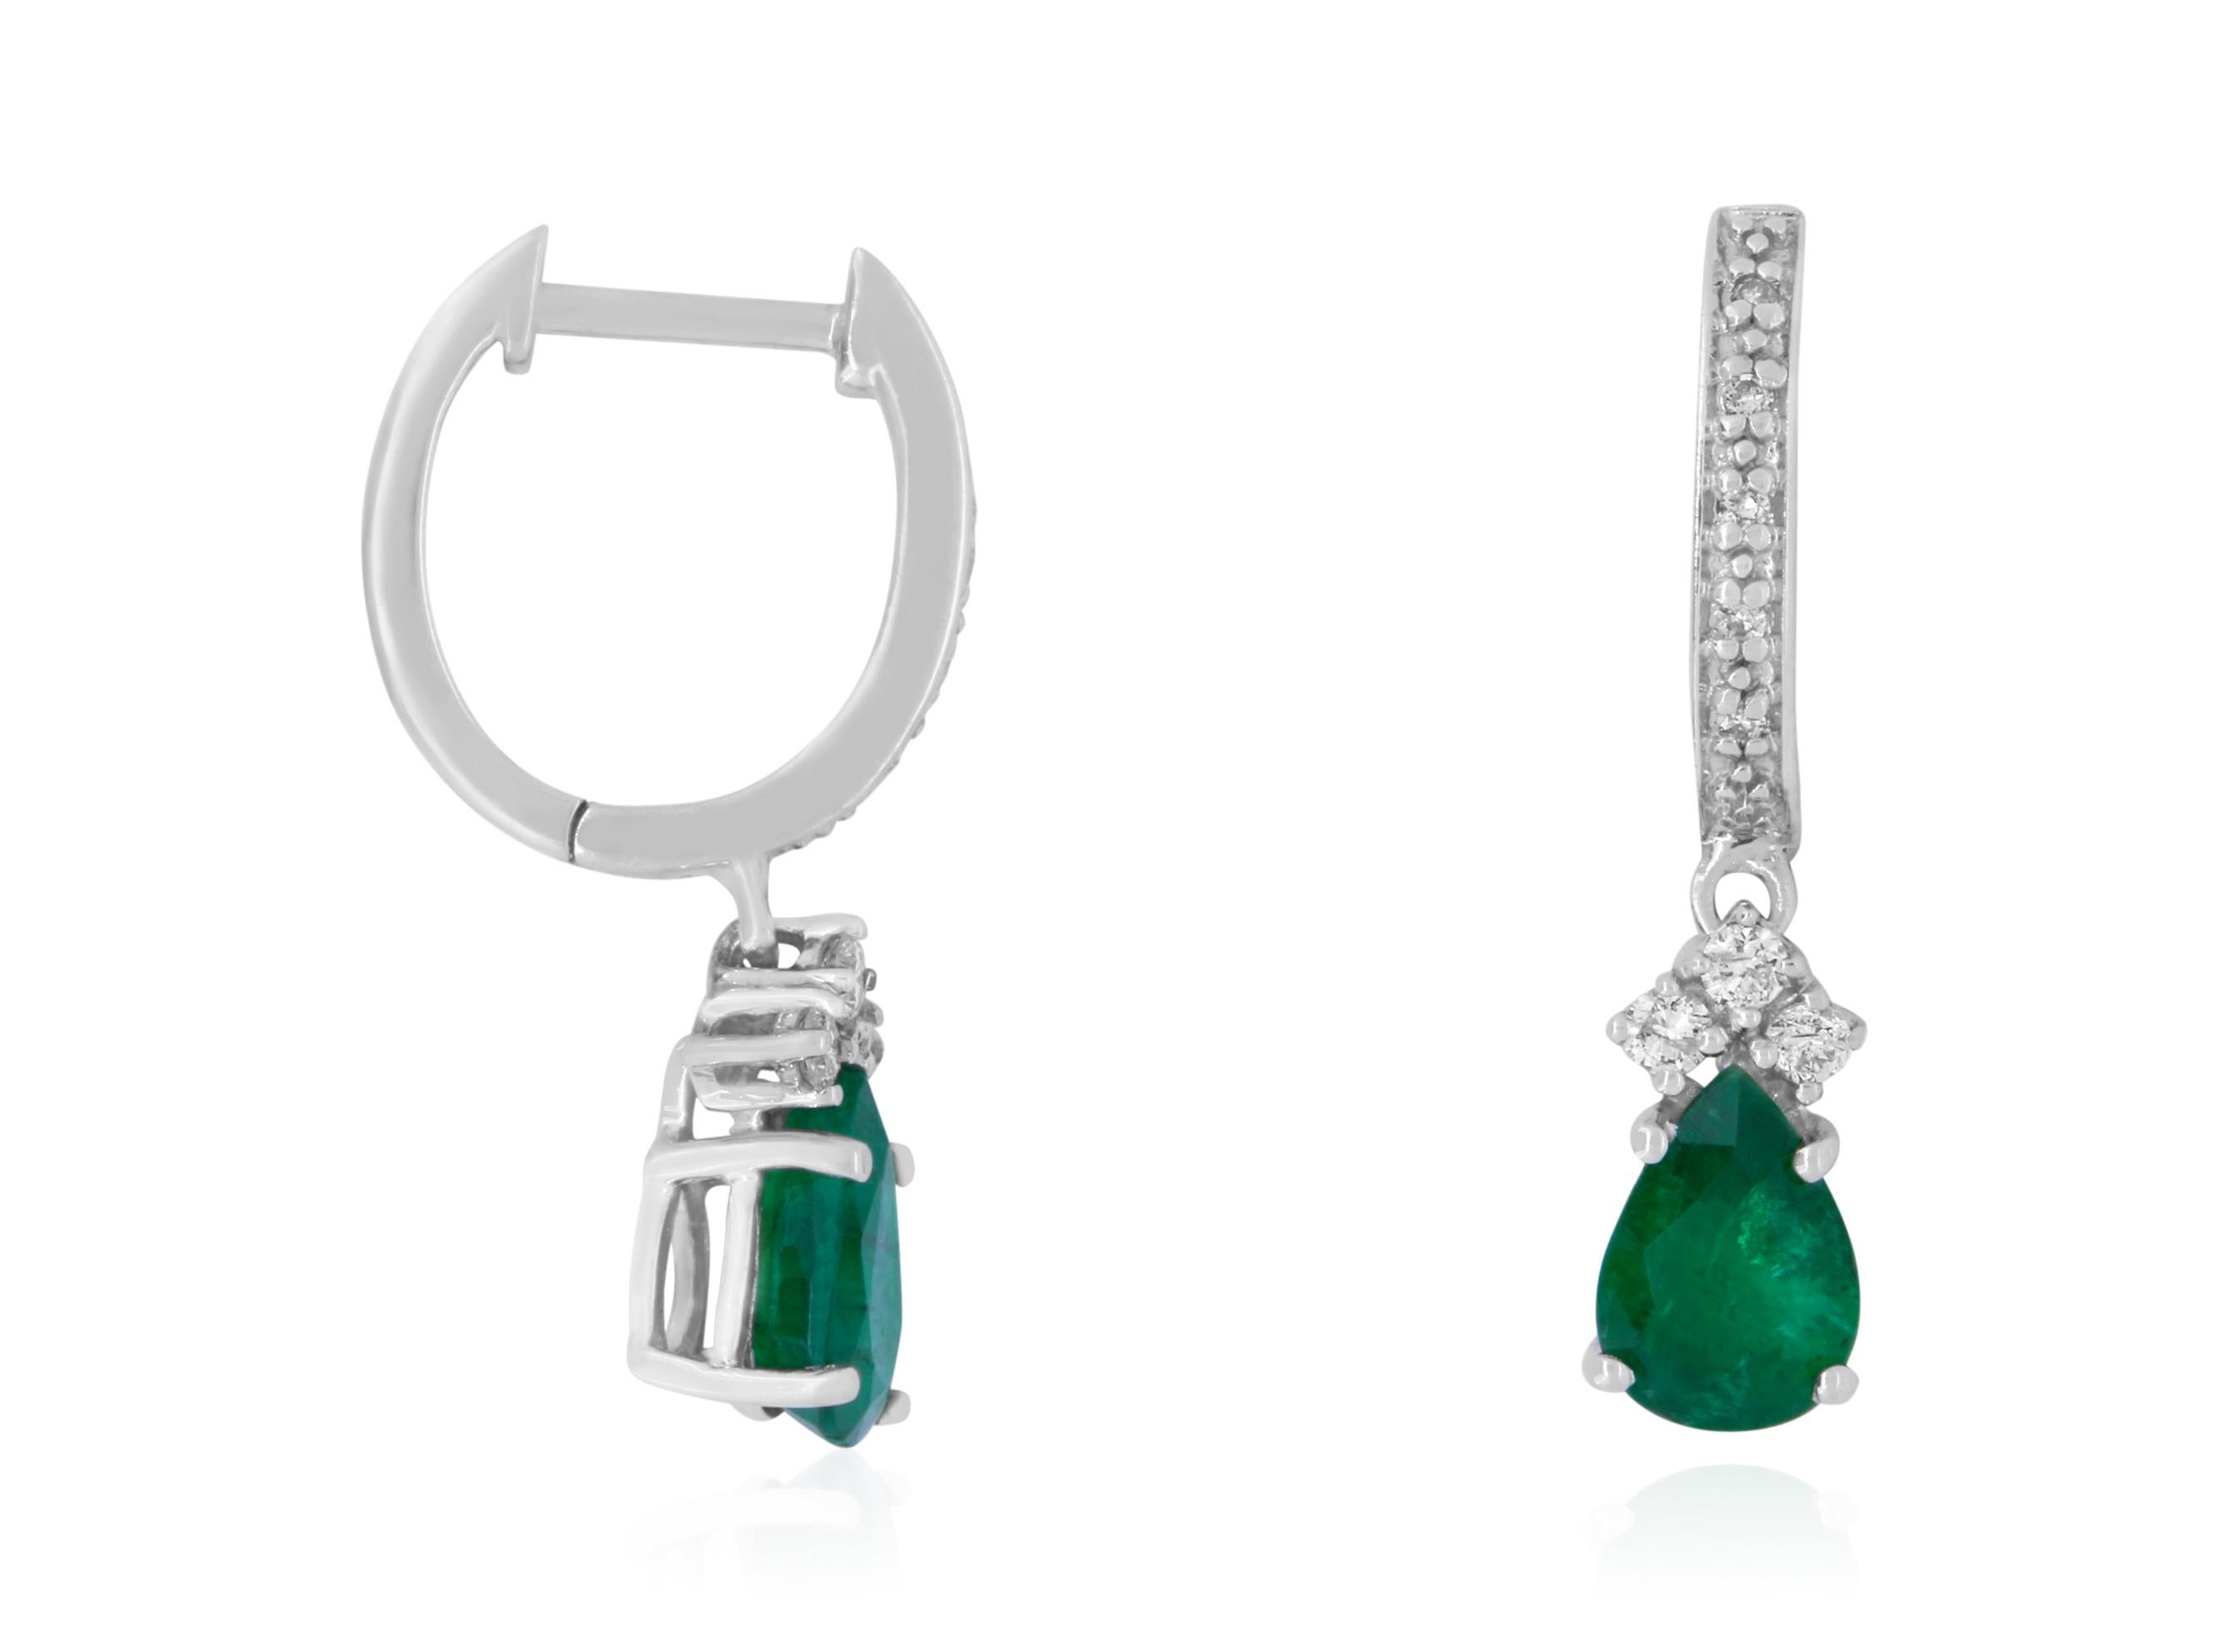 It doesn't get more elegant than these Pear Shaped Emeralds. Accompanied by 0.11 Carats of Brilliant White Round Diamonds, these are a stunning and classy look for all occasions. 

Material: 14k White Gold 
Stone Details: 2 Pear Shaped Emeralds at